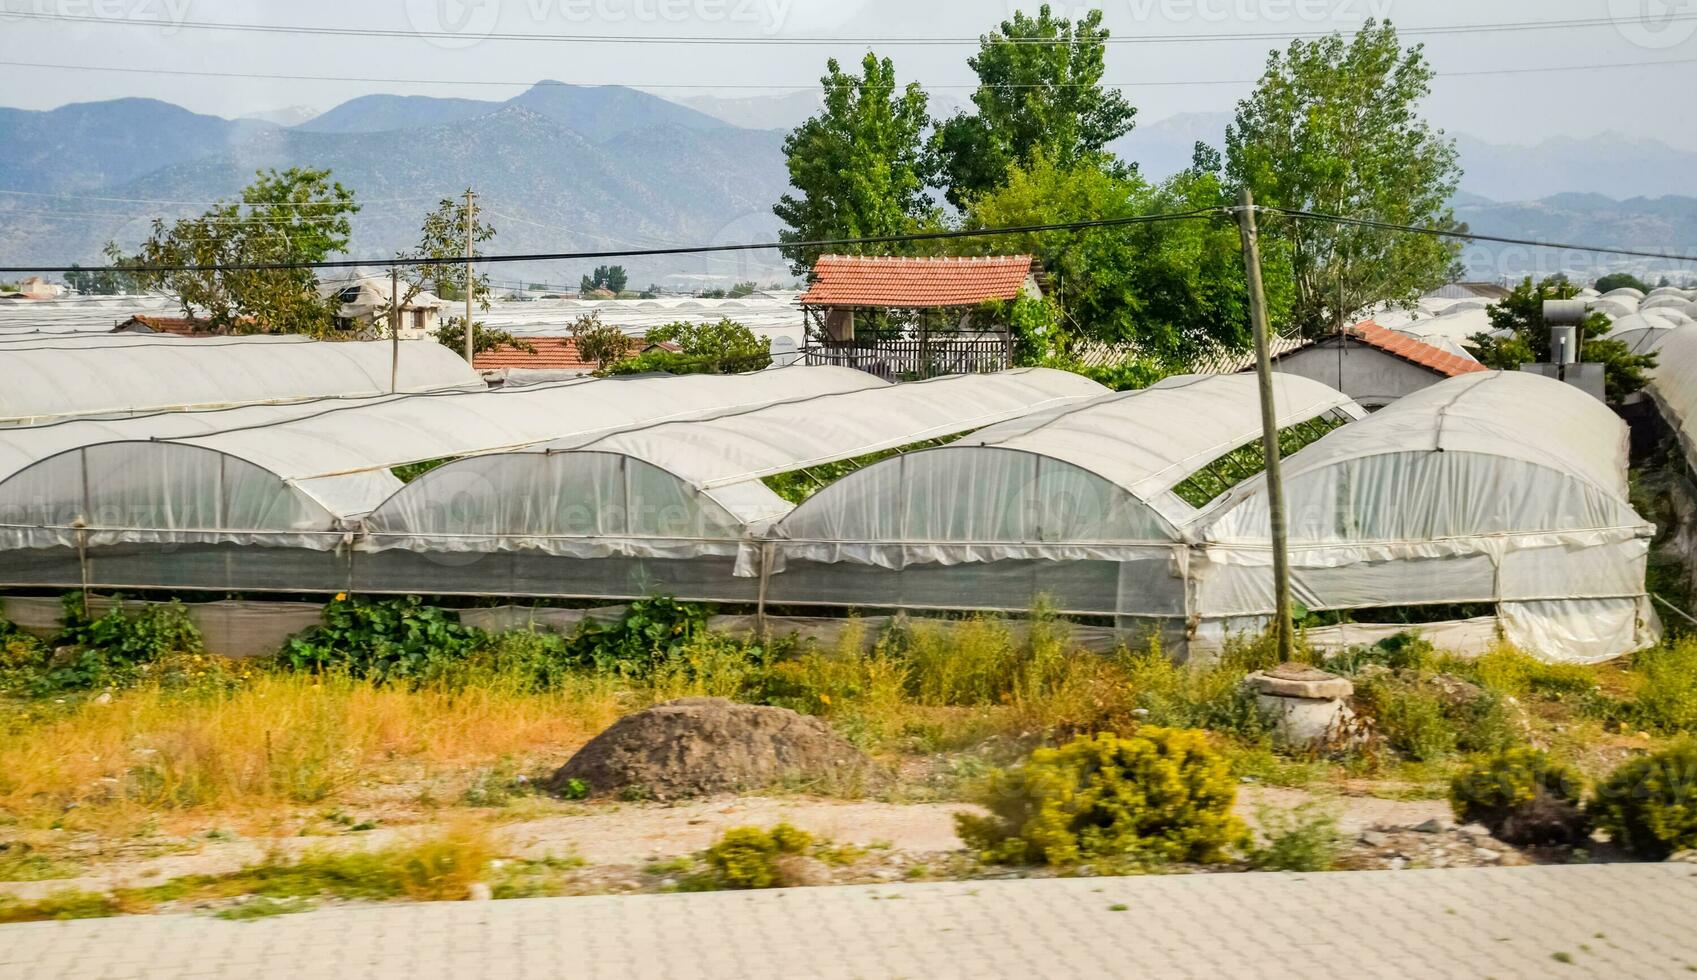 Turkish greenhouses, growing tomatoes in greenhouses photo